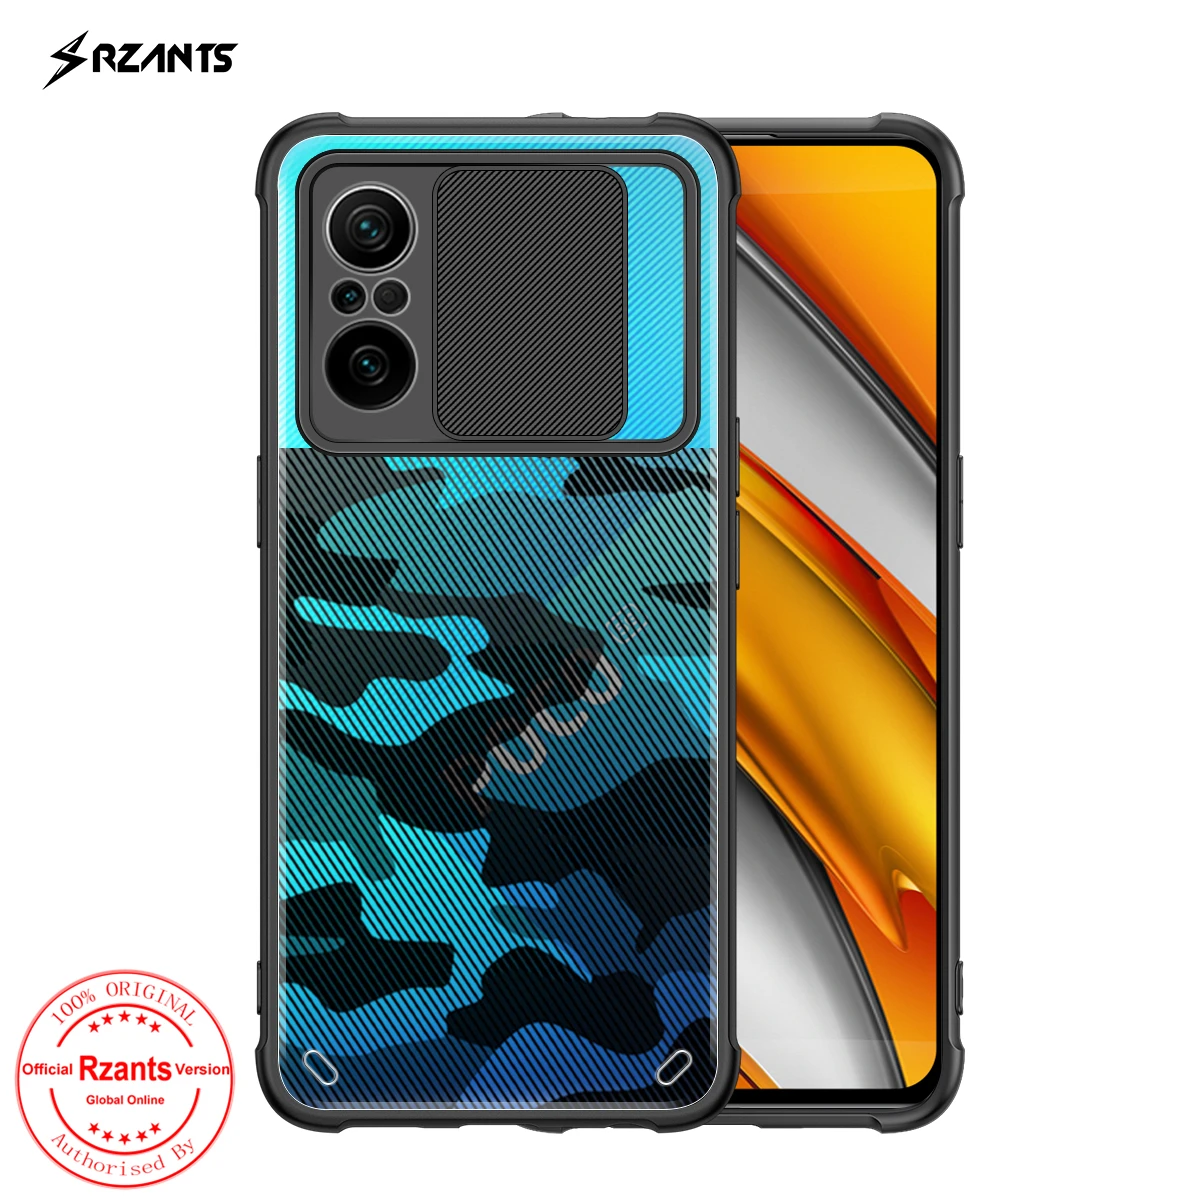 

Rzants For POCO F3 Redmi K40 K40 Pro MI 11i Case Hard [Camouflage Lens] Lens Protection Shockproof Slim Crystal Clear Cove